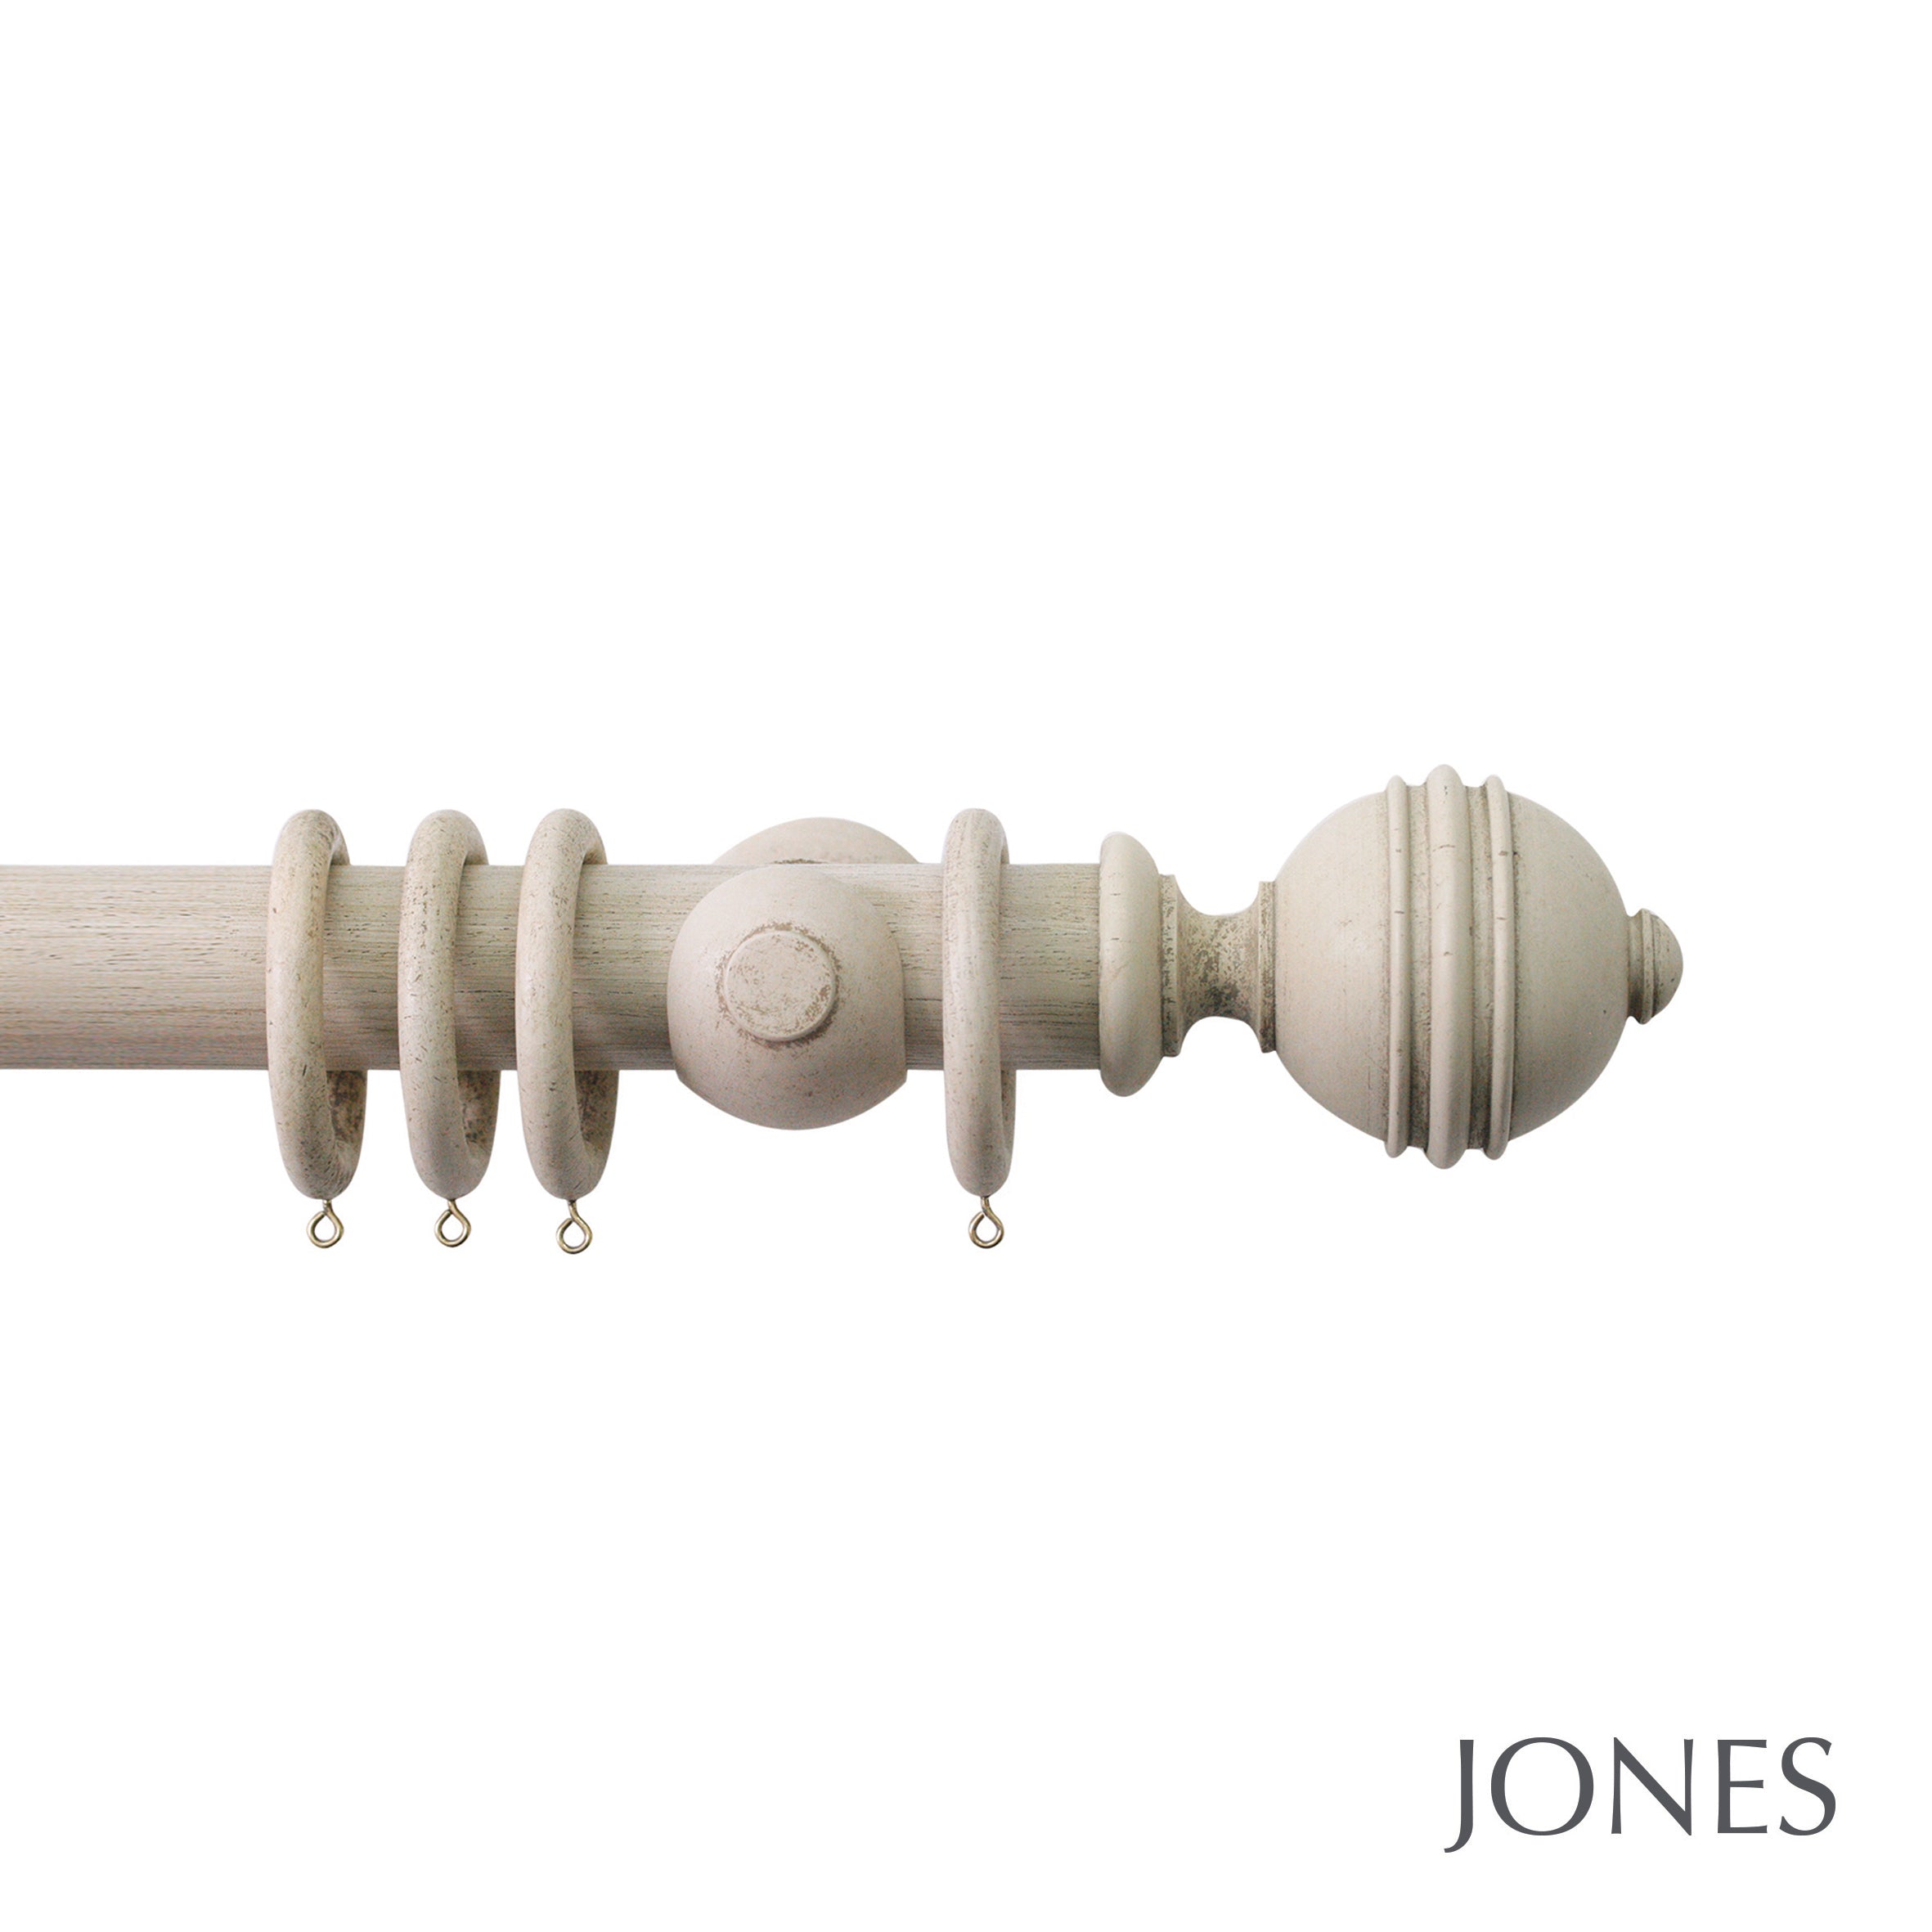 Jones Interiors Florentine Ribbed Ball Finial Curtain Pole Set in Putty